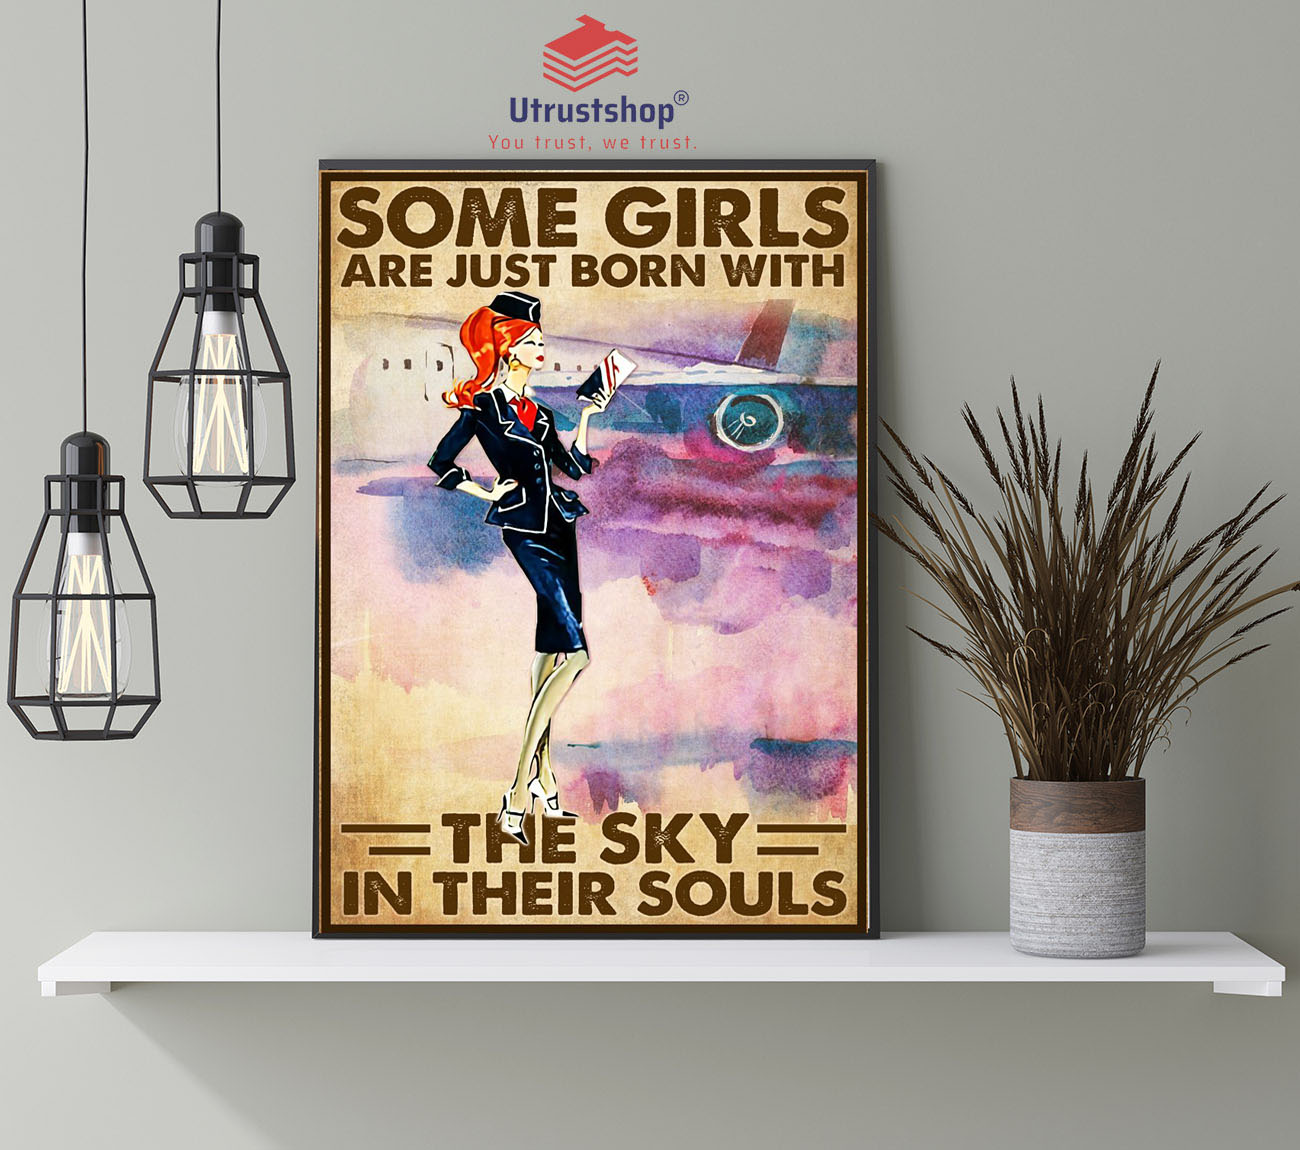 Some girls are just born with the sky in their souls poster4